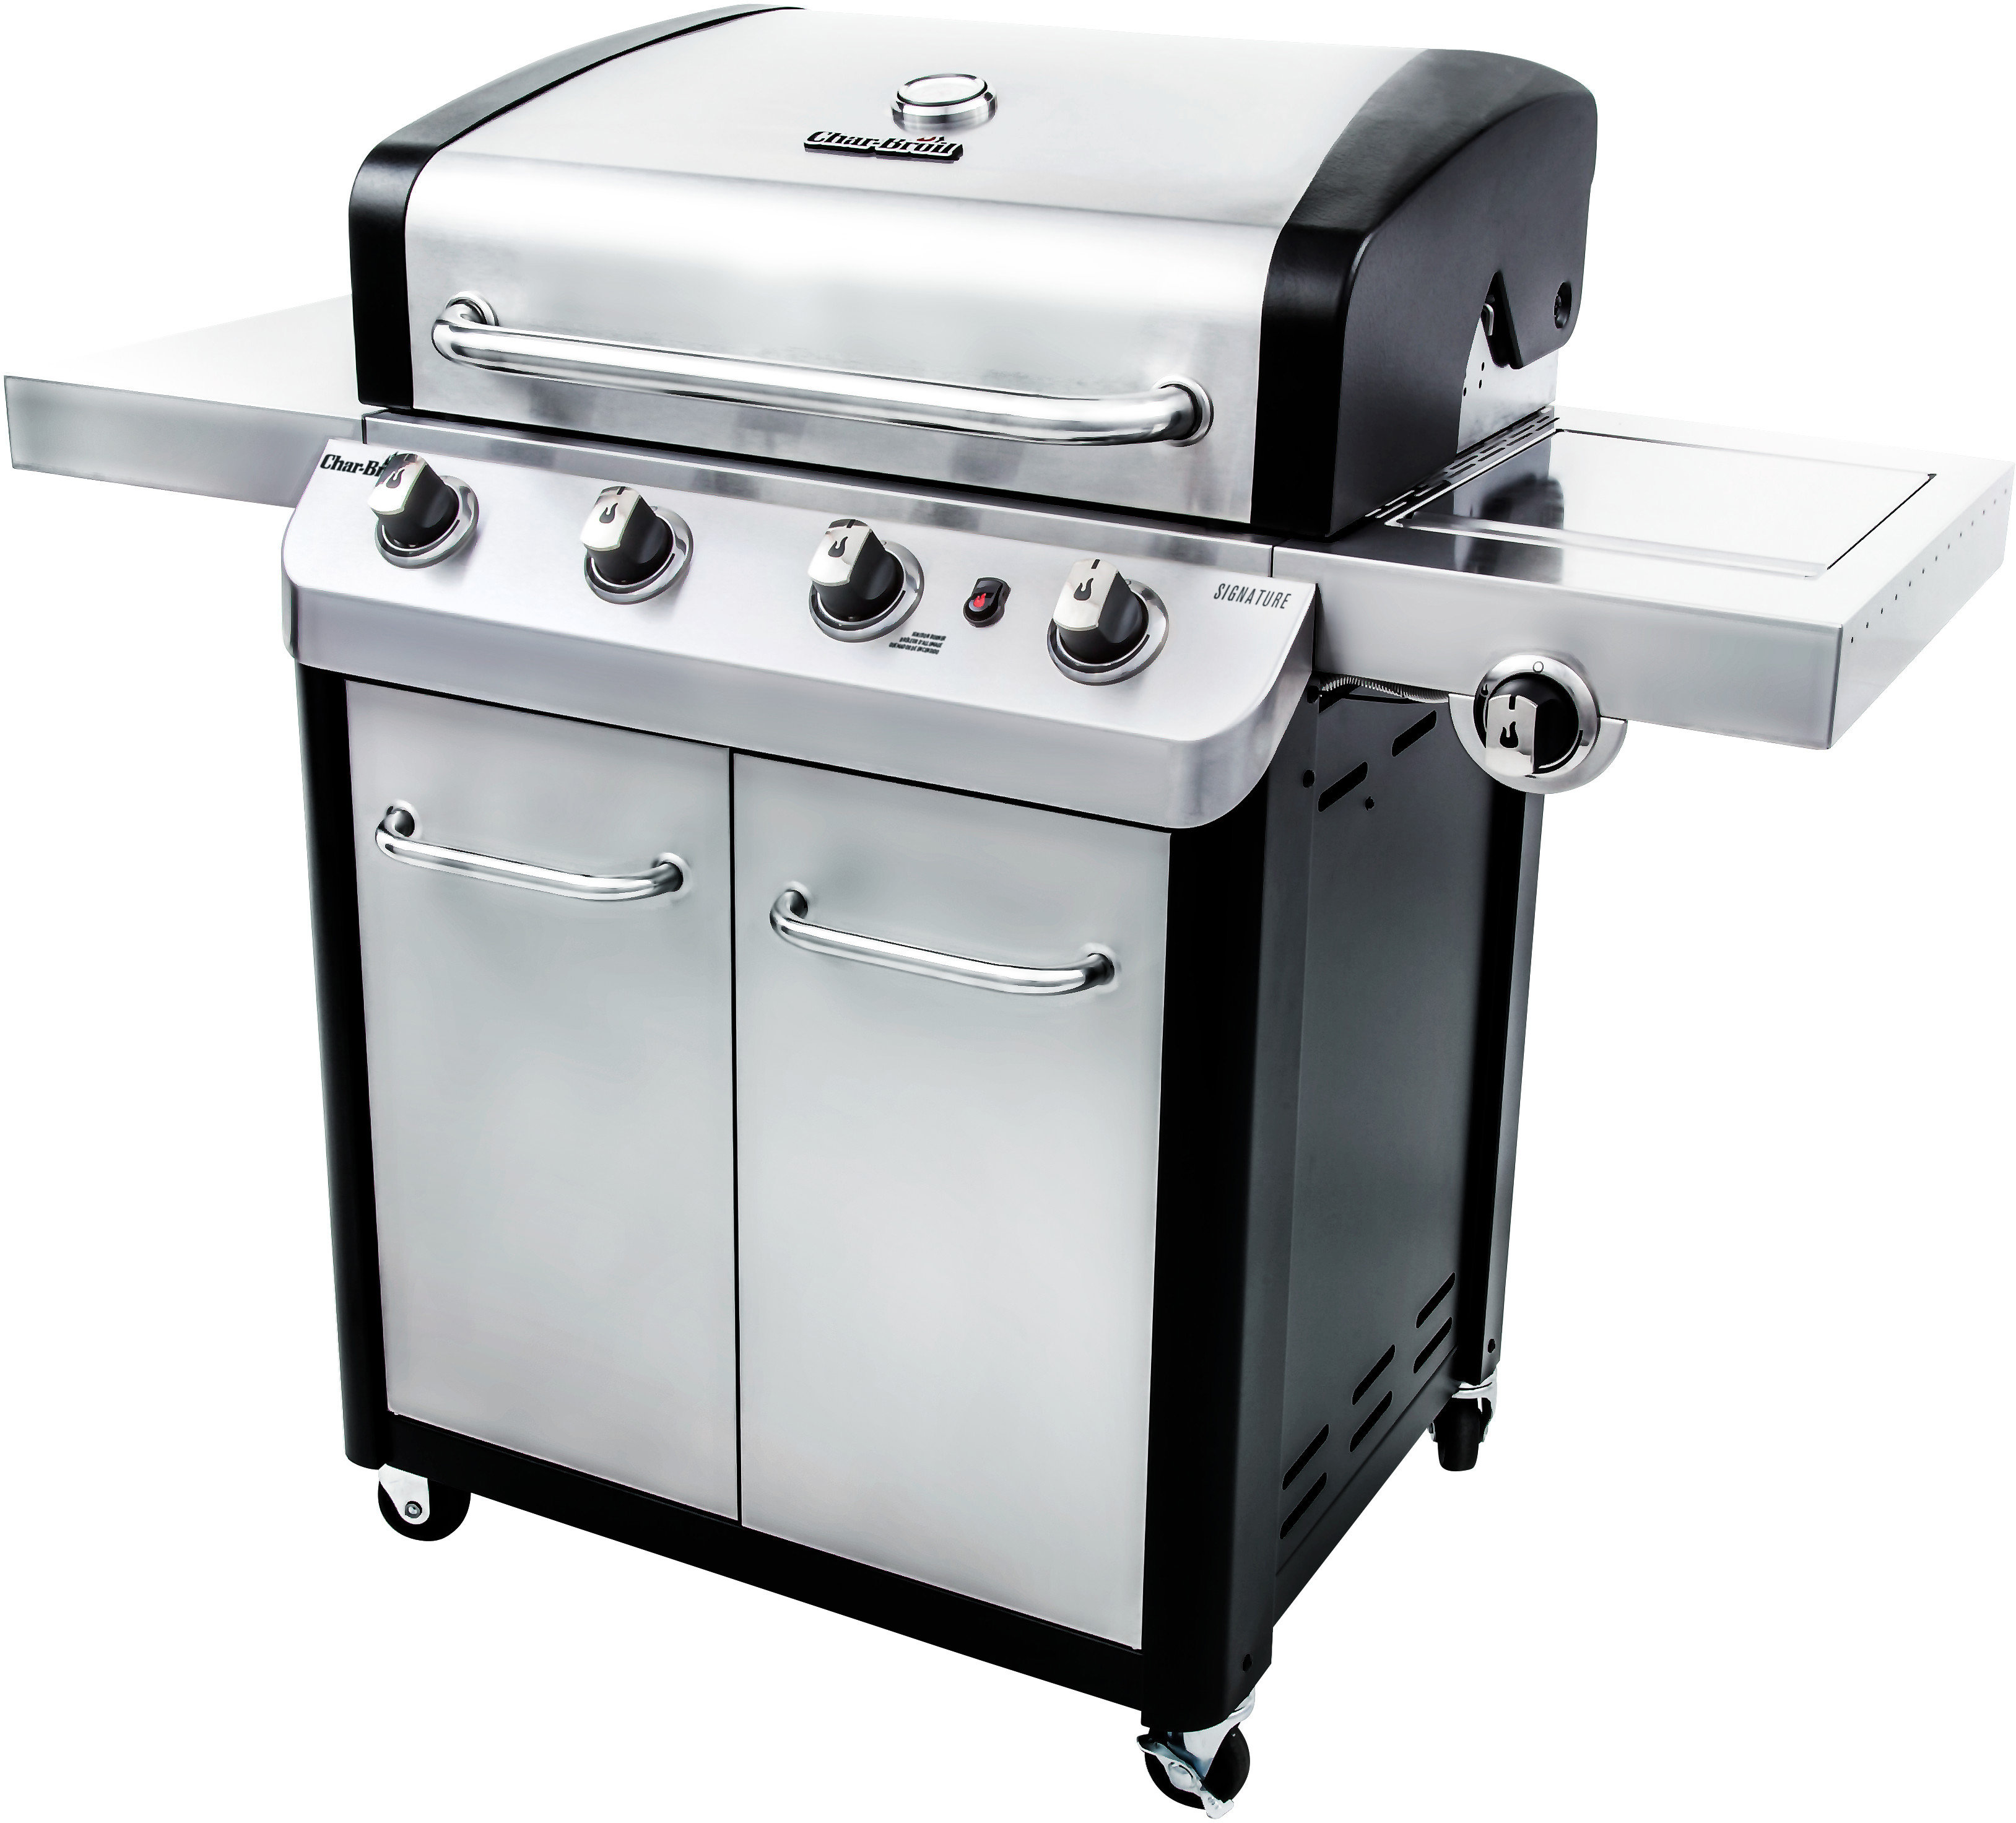 Backyard Classic Professional Grill Manual - House of ...